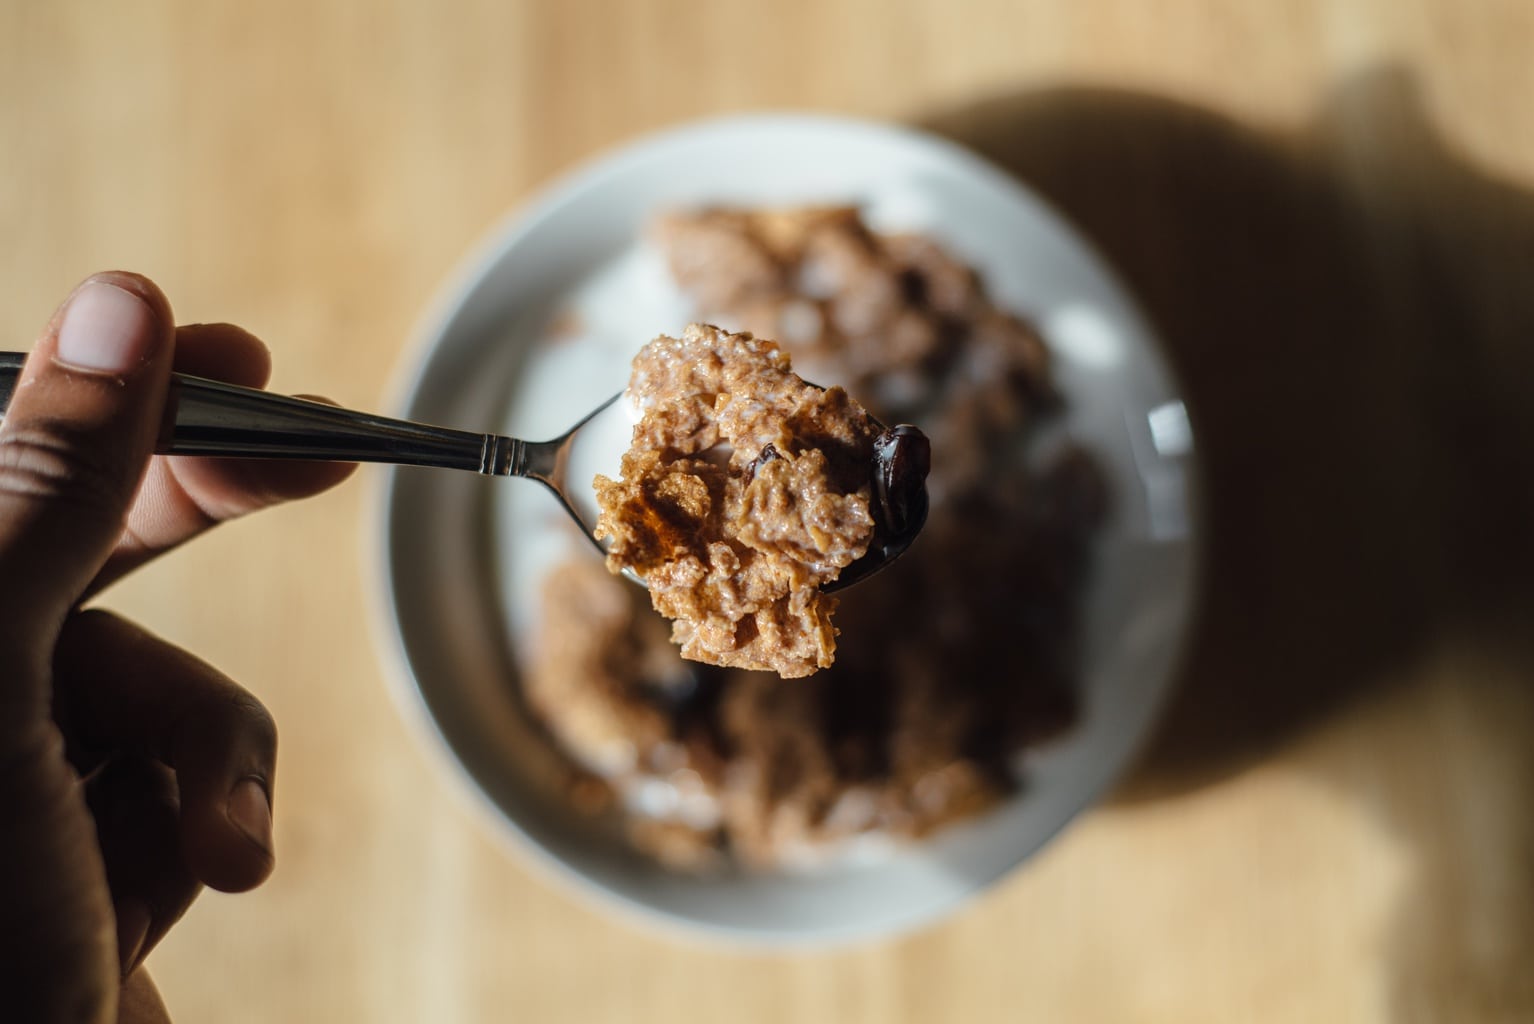 A hand holds a spoonful of cereal over a full bowl sitting on a table.